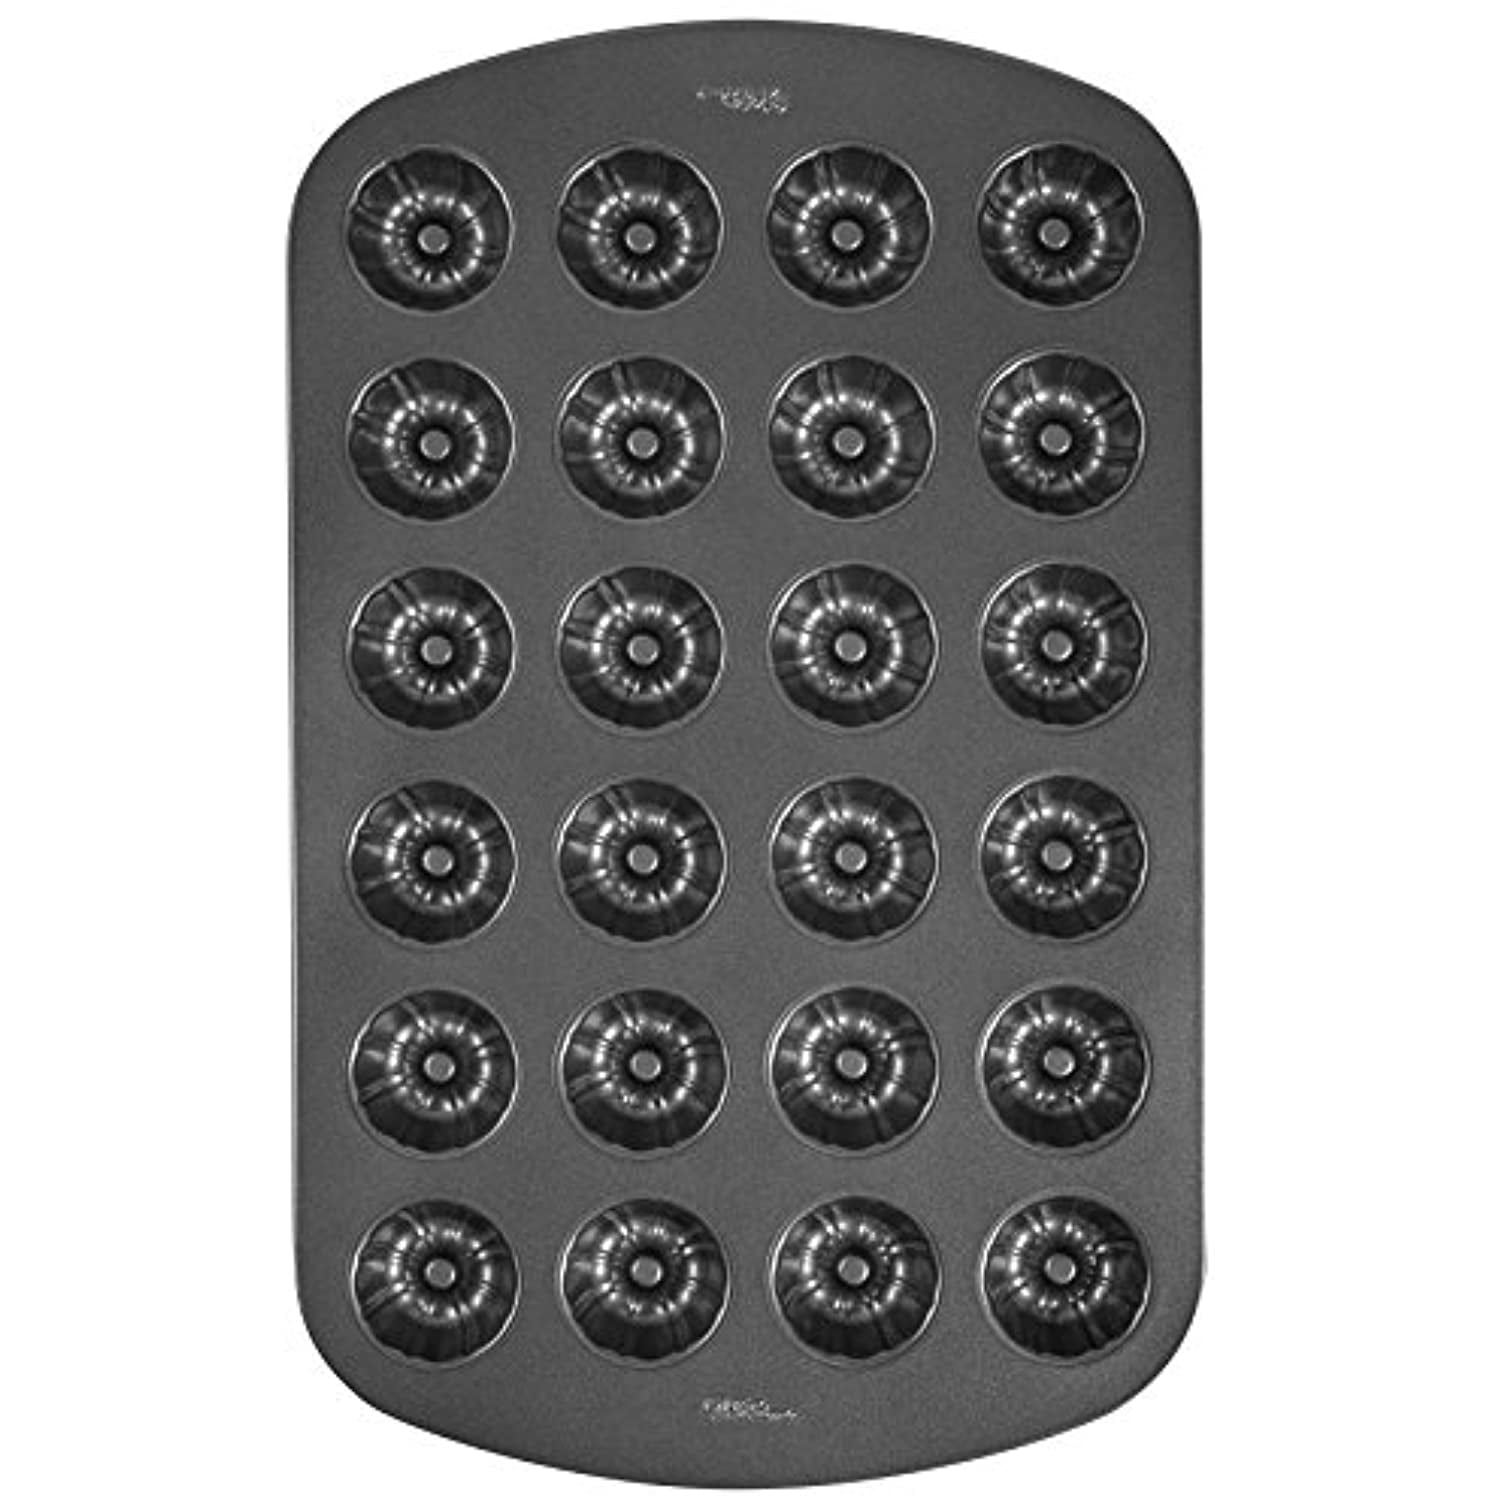 ZENFUN Set of 10 Mini Fluted Tube Pan, 4 Inch Carbon Steel Fluted Cake Mold  Cup with Flower Shape, Nonstick Cake Pan Mini Tube Oven Baking Mold for